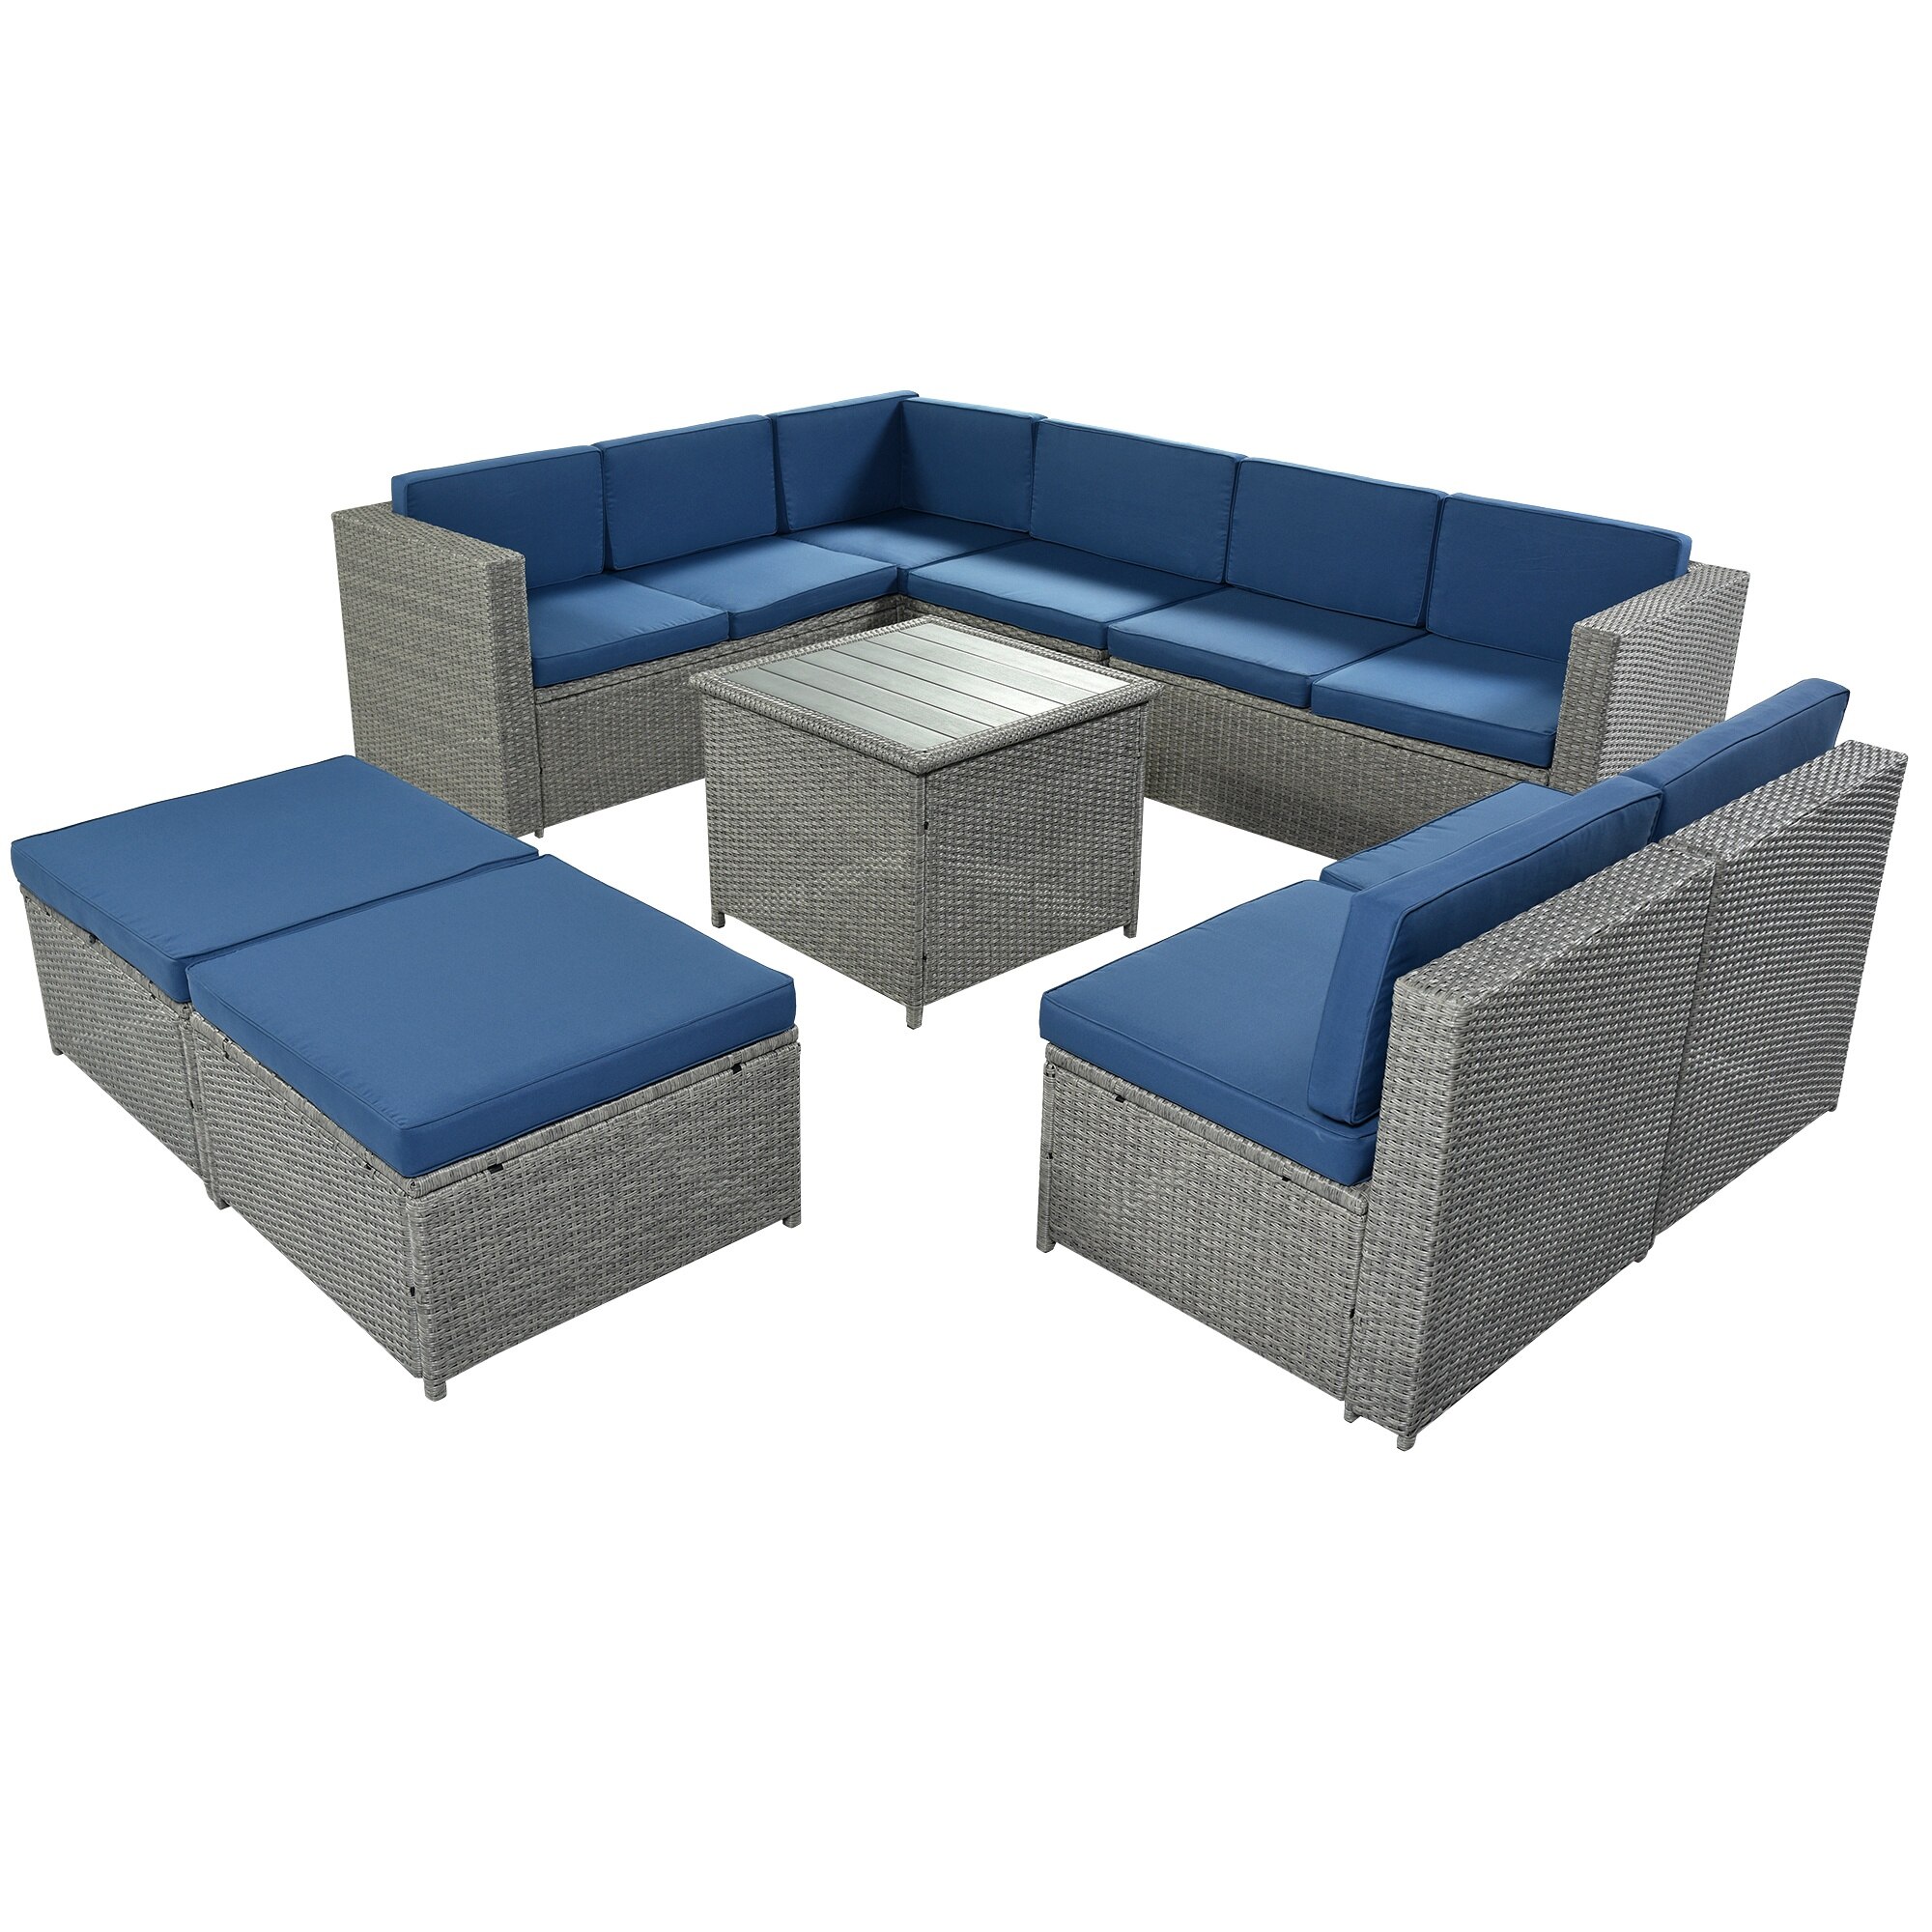 9 Piece Rattan Sectional Seating Group With Cushions And Ottoman Patio Furniture Sets Outdoor Wicker Sectional Garden Sofas 4